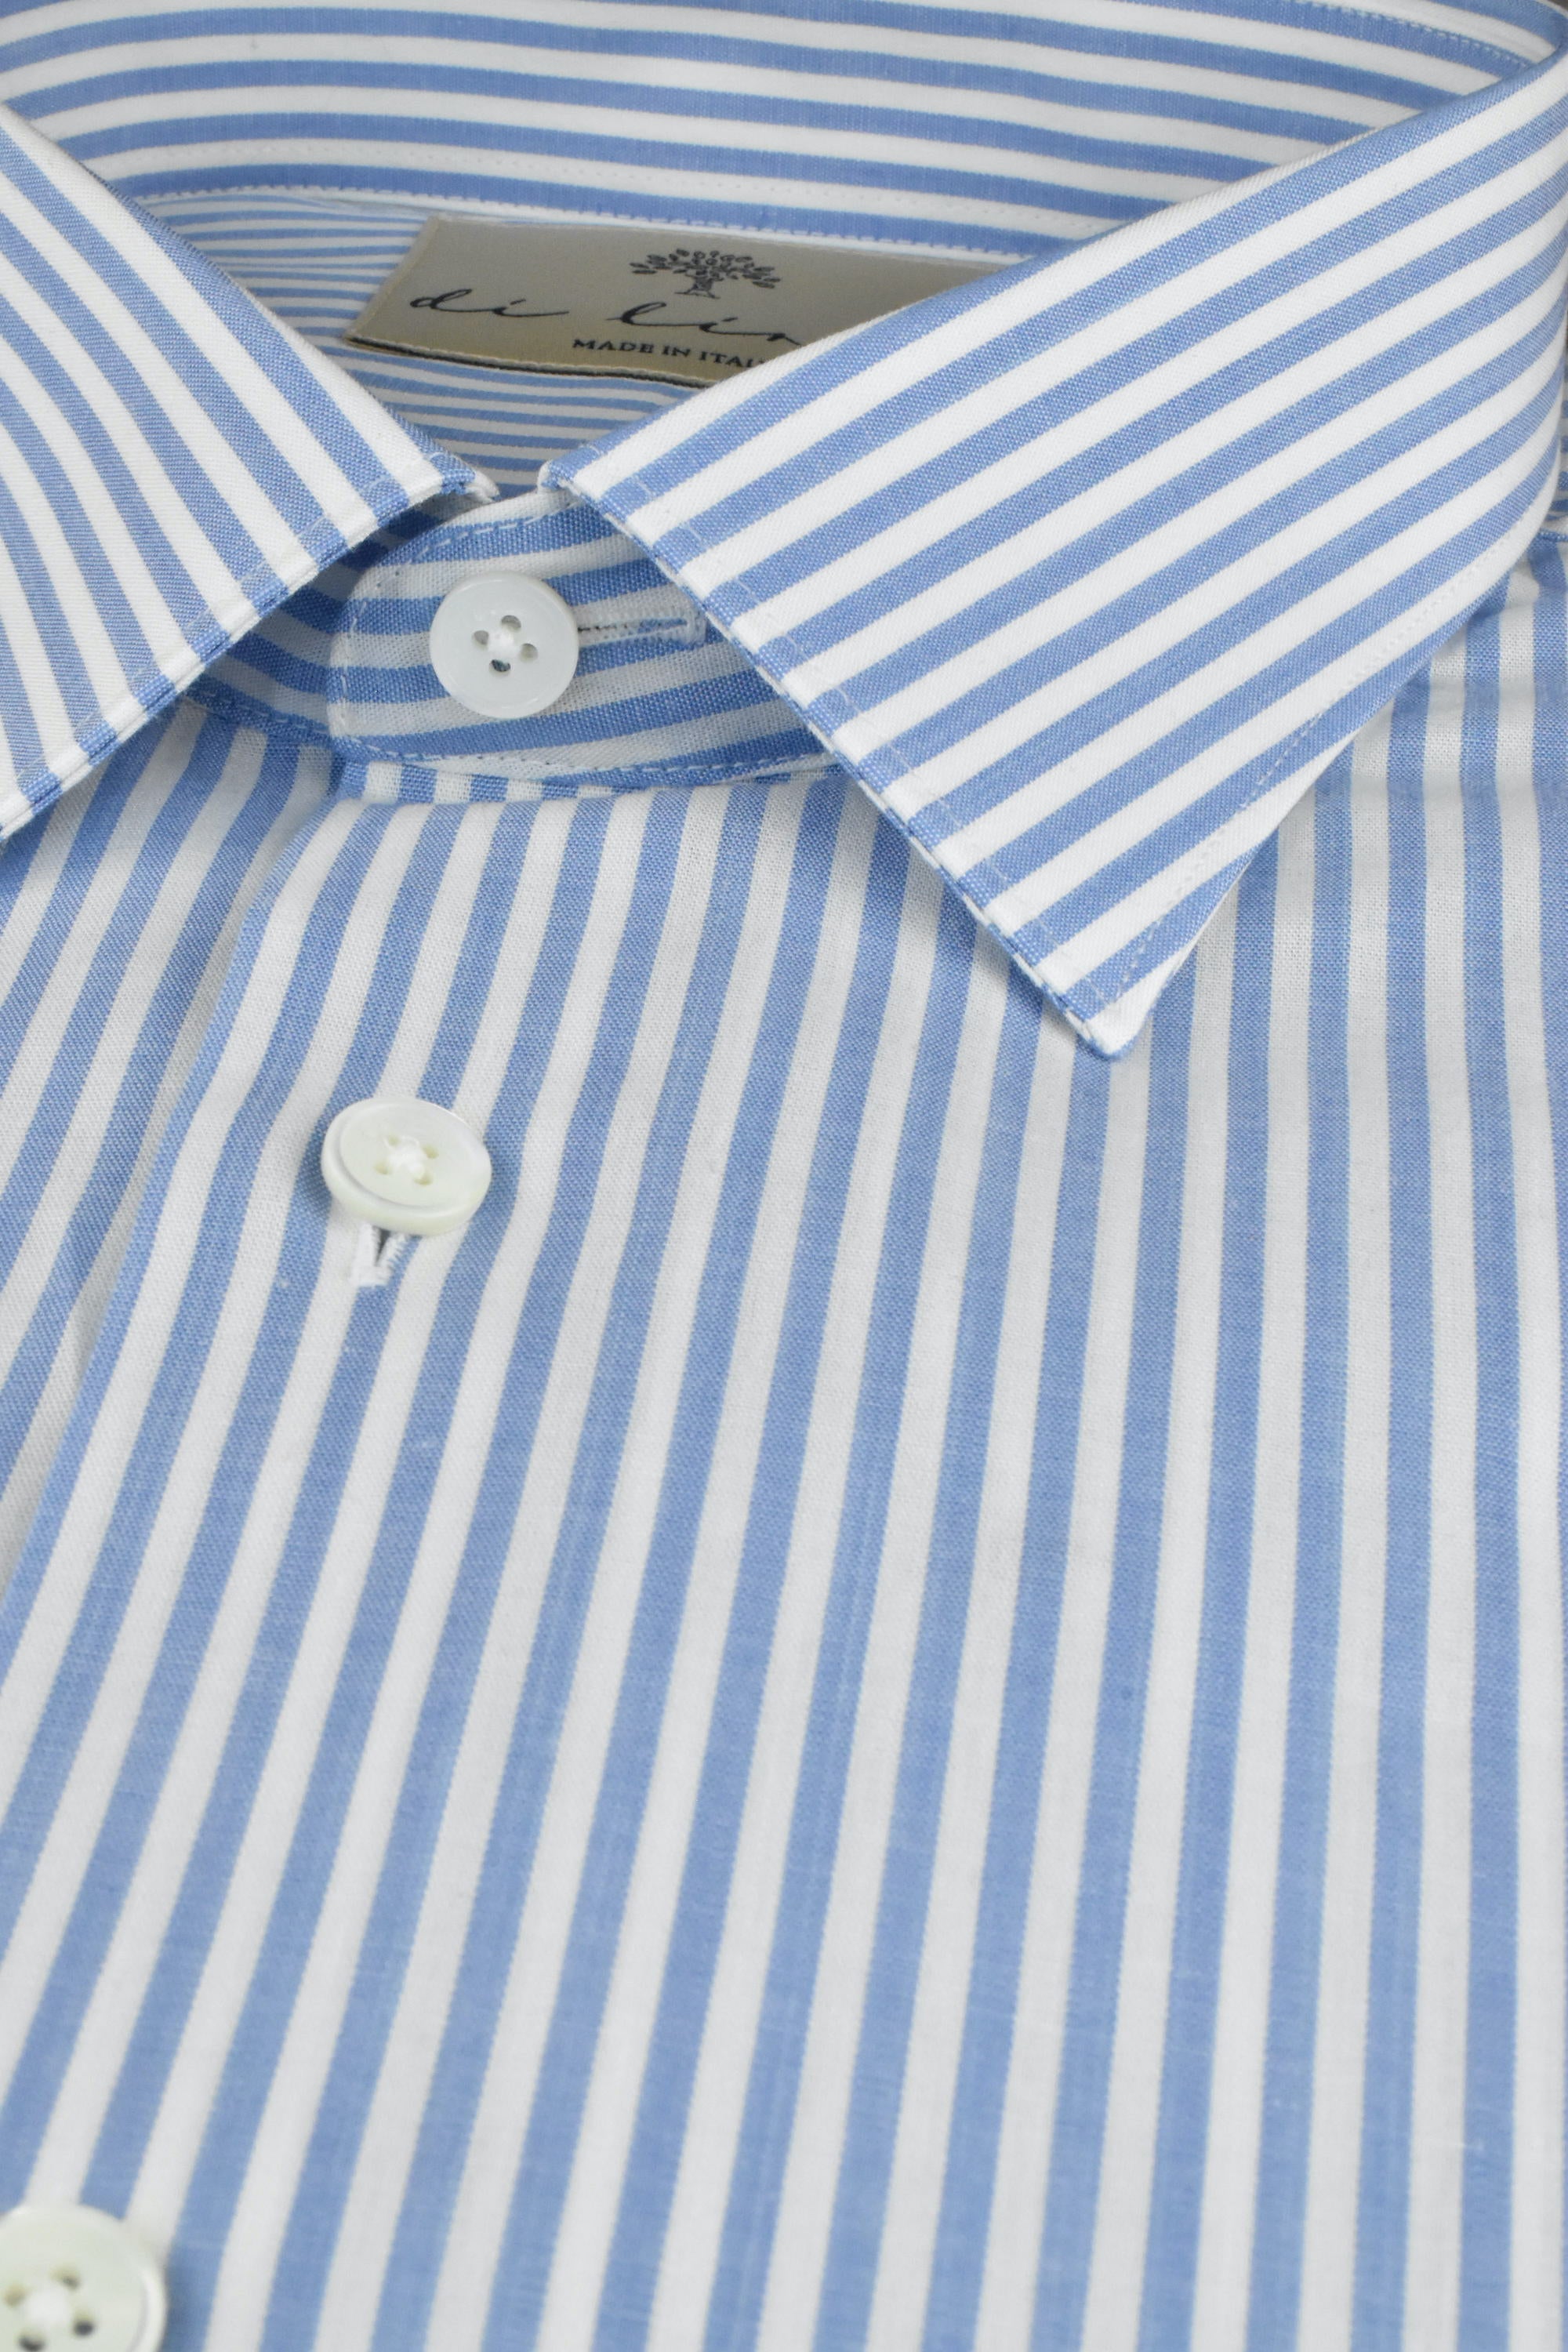 Shirt with blue and white stripes made of organic cotton - Made to order